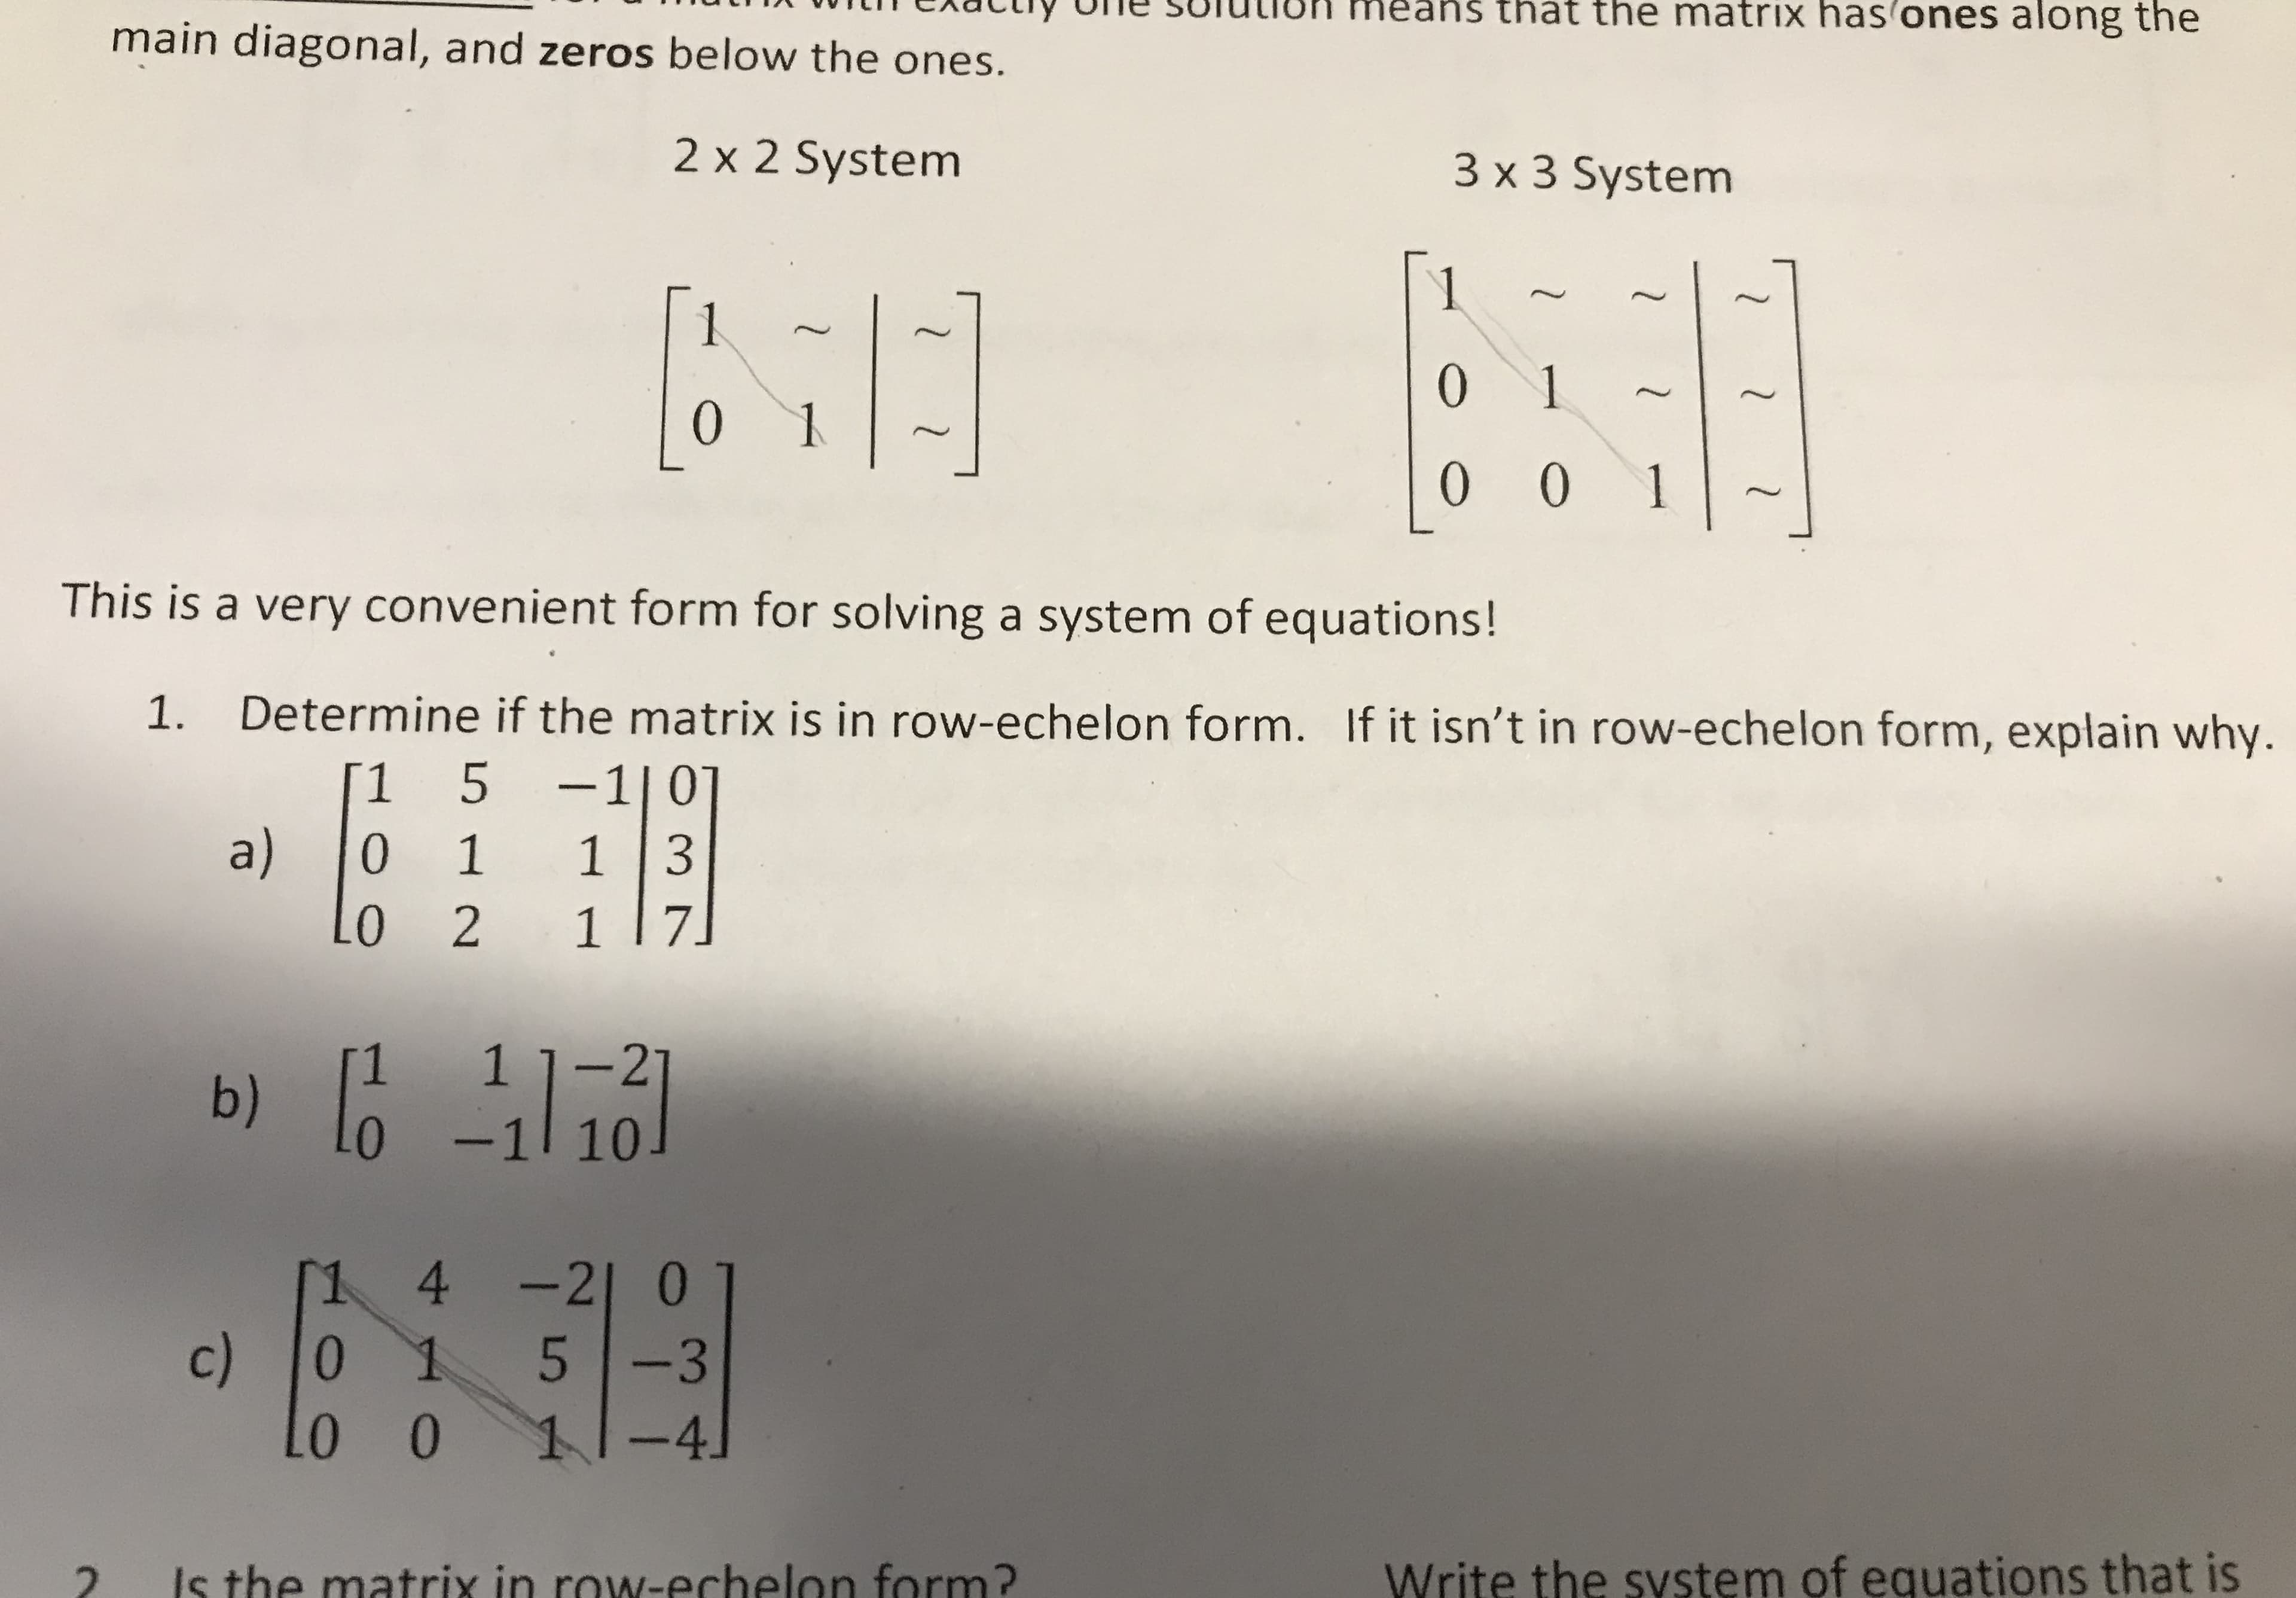 s that the matrix has ones along the
main diagonal, and zeros below the ones.
2 x 2 System
3 x 3 System
1
1
0 1
0
0 0 1
This is a very convenient form for solving a system of equations!
Determine if the matrix is in row-echelon form. If it isn't in row-echelon form, explain why.
1.
-1 | 0
1 3
5
1
a)
0
1
1 7
0 2
1 1-21
b)
-1 10
1 4-21 0
c)
L0 0
0
-3
11-4
Write the system of equations that is
Is the matrix in rowN-echelon form?
2
1 l
1 2
